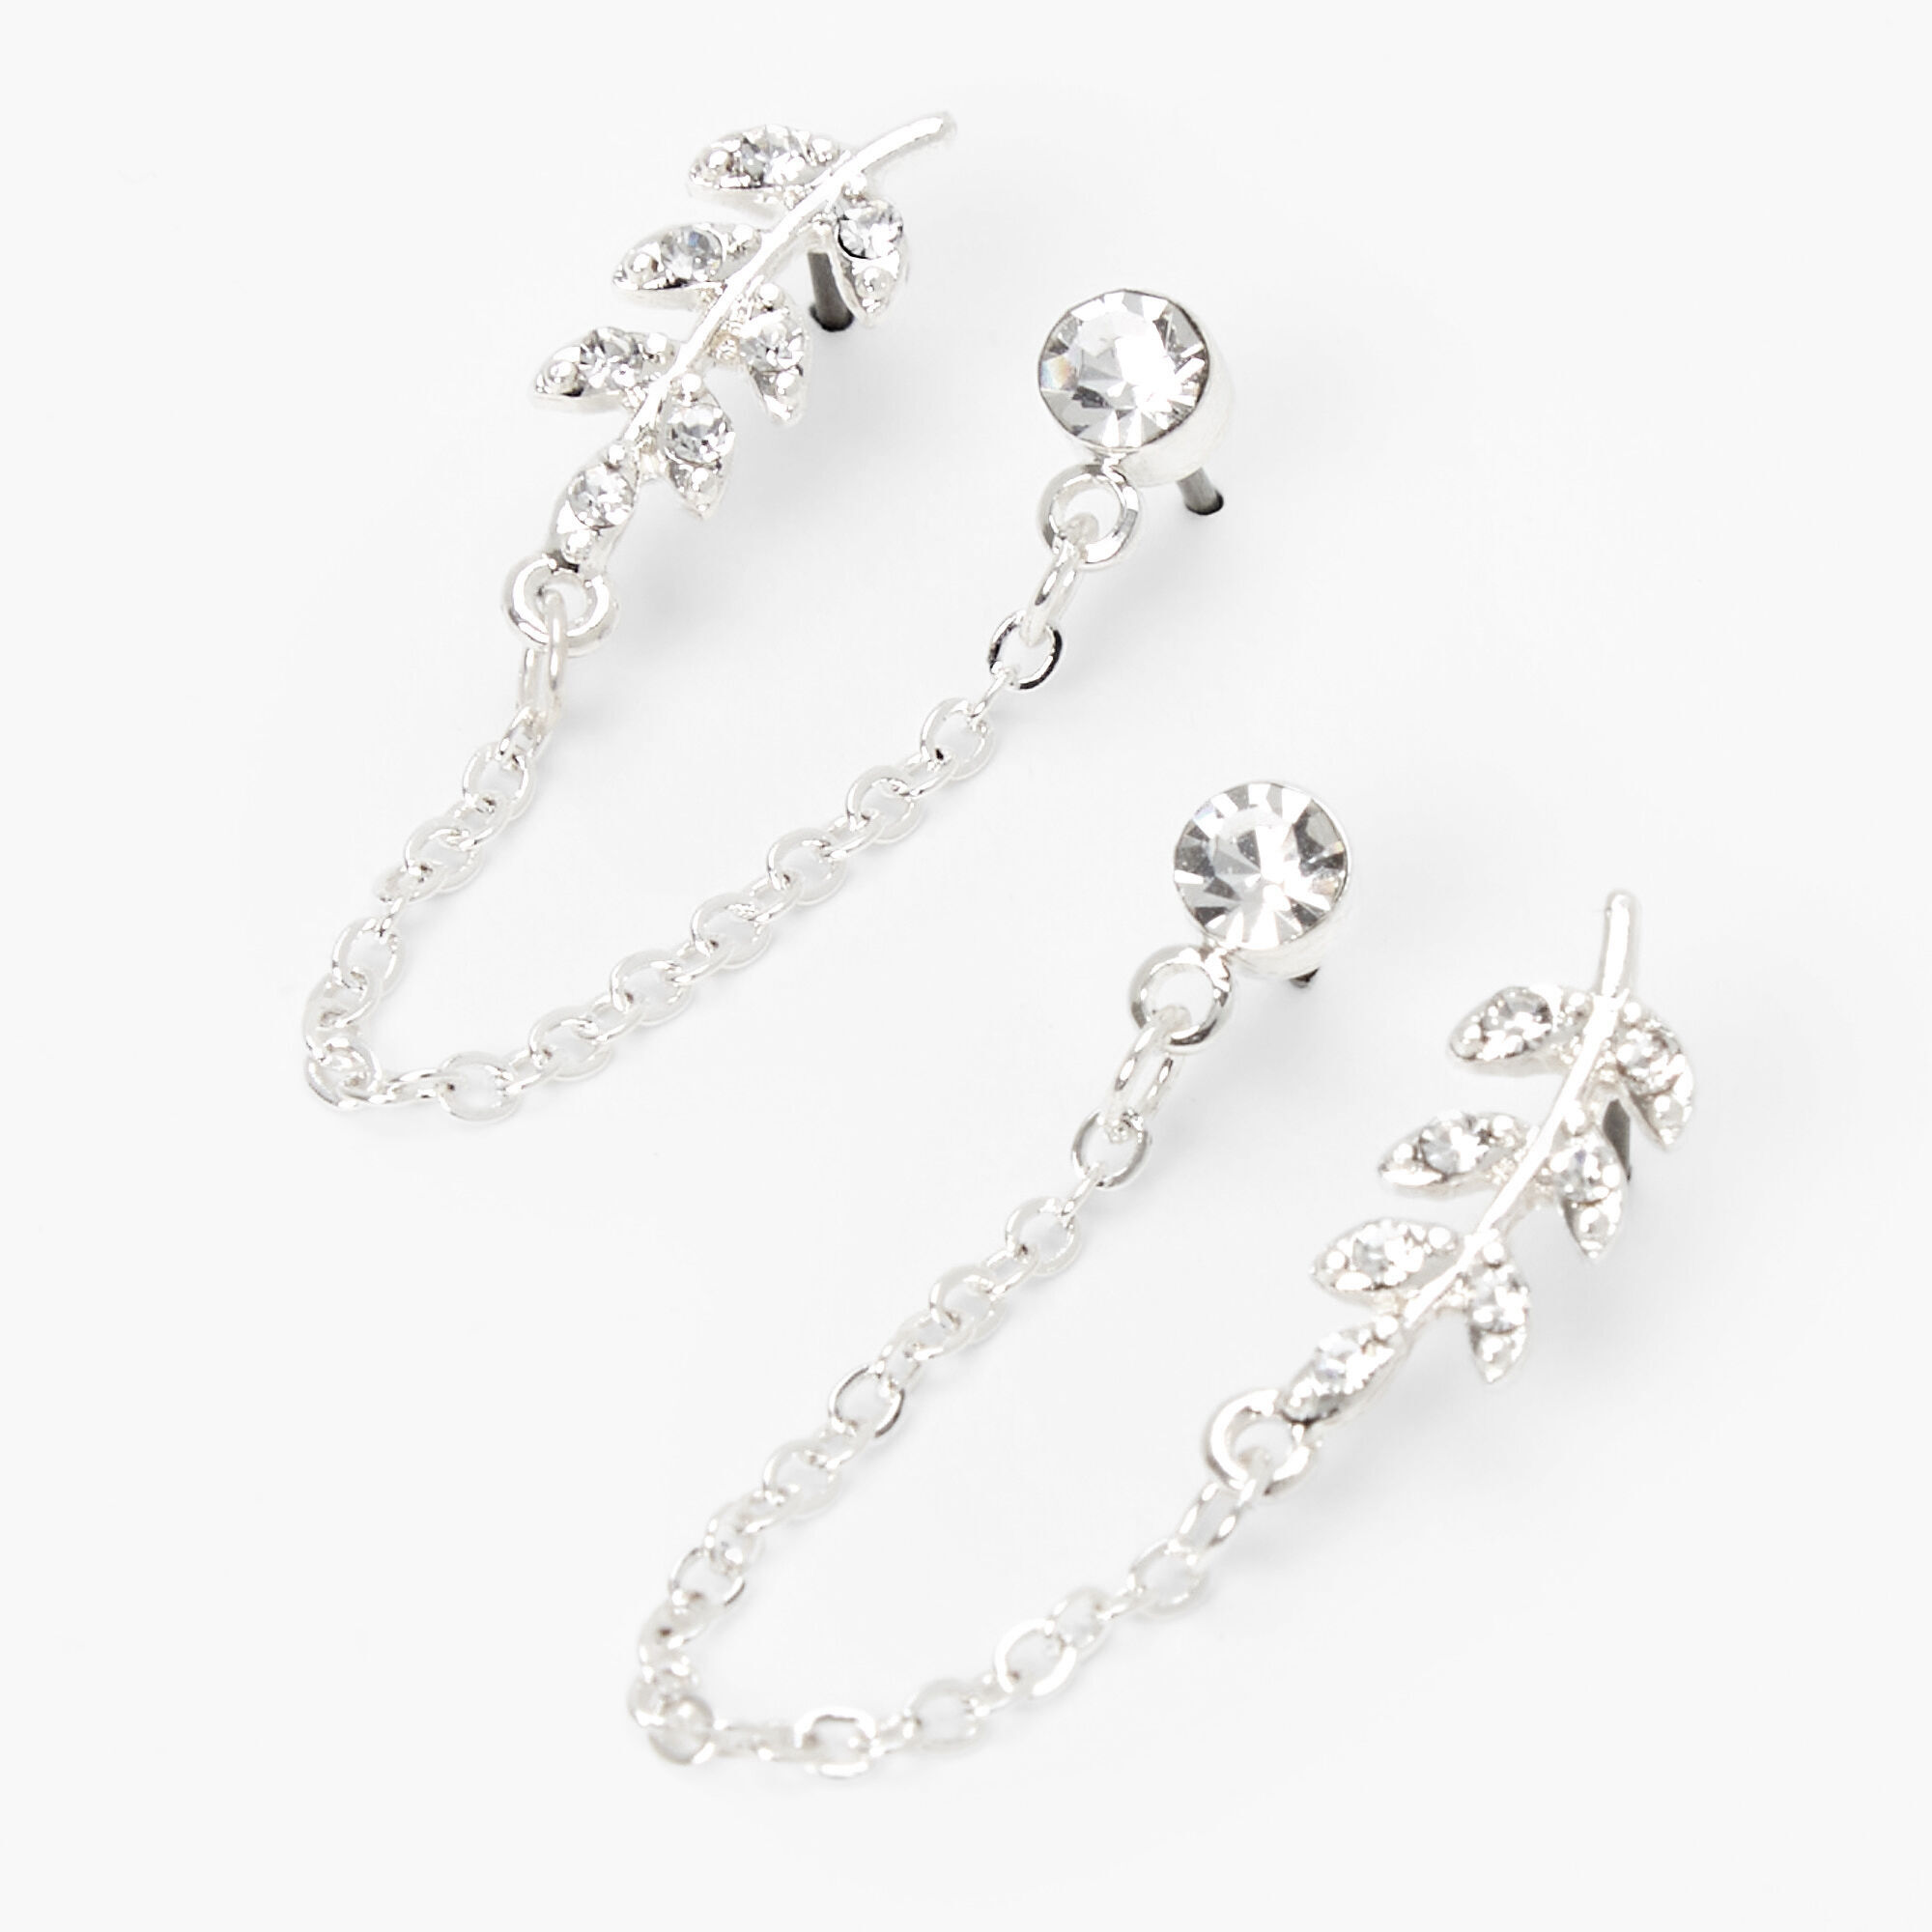 View Claires Crystal Leaf Connector Chain Stud Earrings Silver information